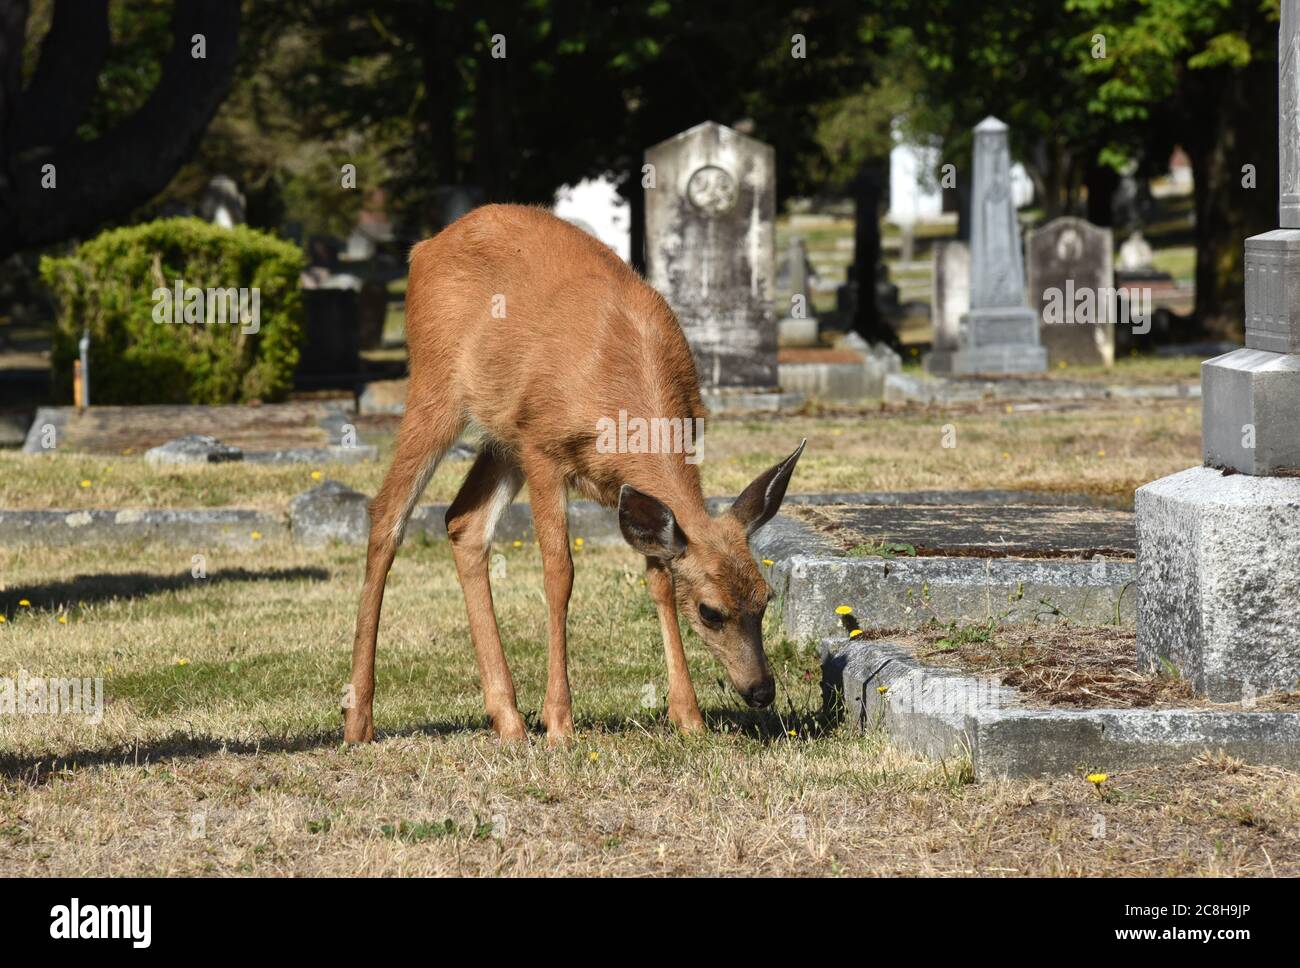 Victoria, British Columbia, Canada 24 July 2020  - A female doe deer grazes between headstones and monuments in the historic Ross Bay Cemetery. Deer encroaching on residential and urban areas are an ongoing problem for the greater Victoria region. . Alamy Live News/Don Denton Credit: Don Denton/Alamy Live News Stock Photo